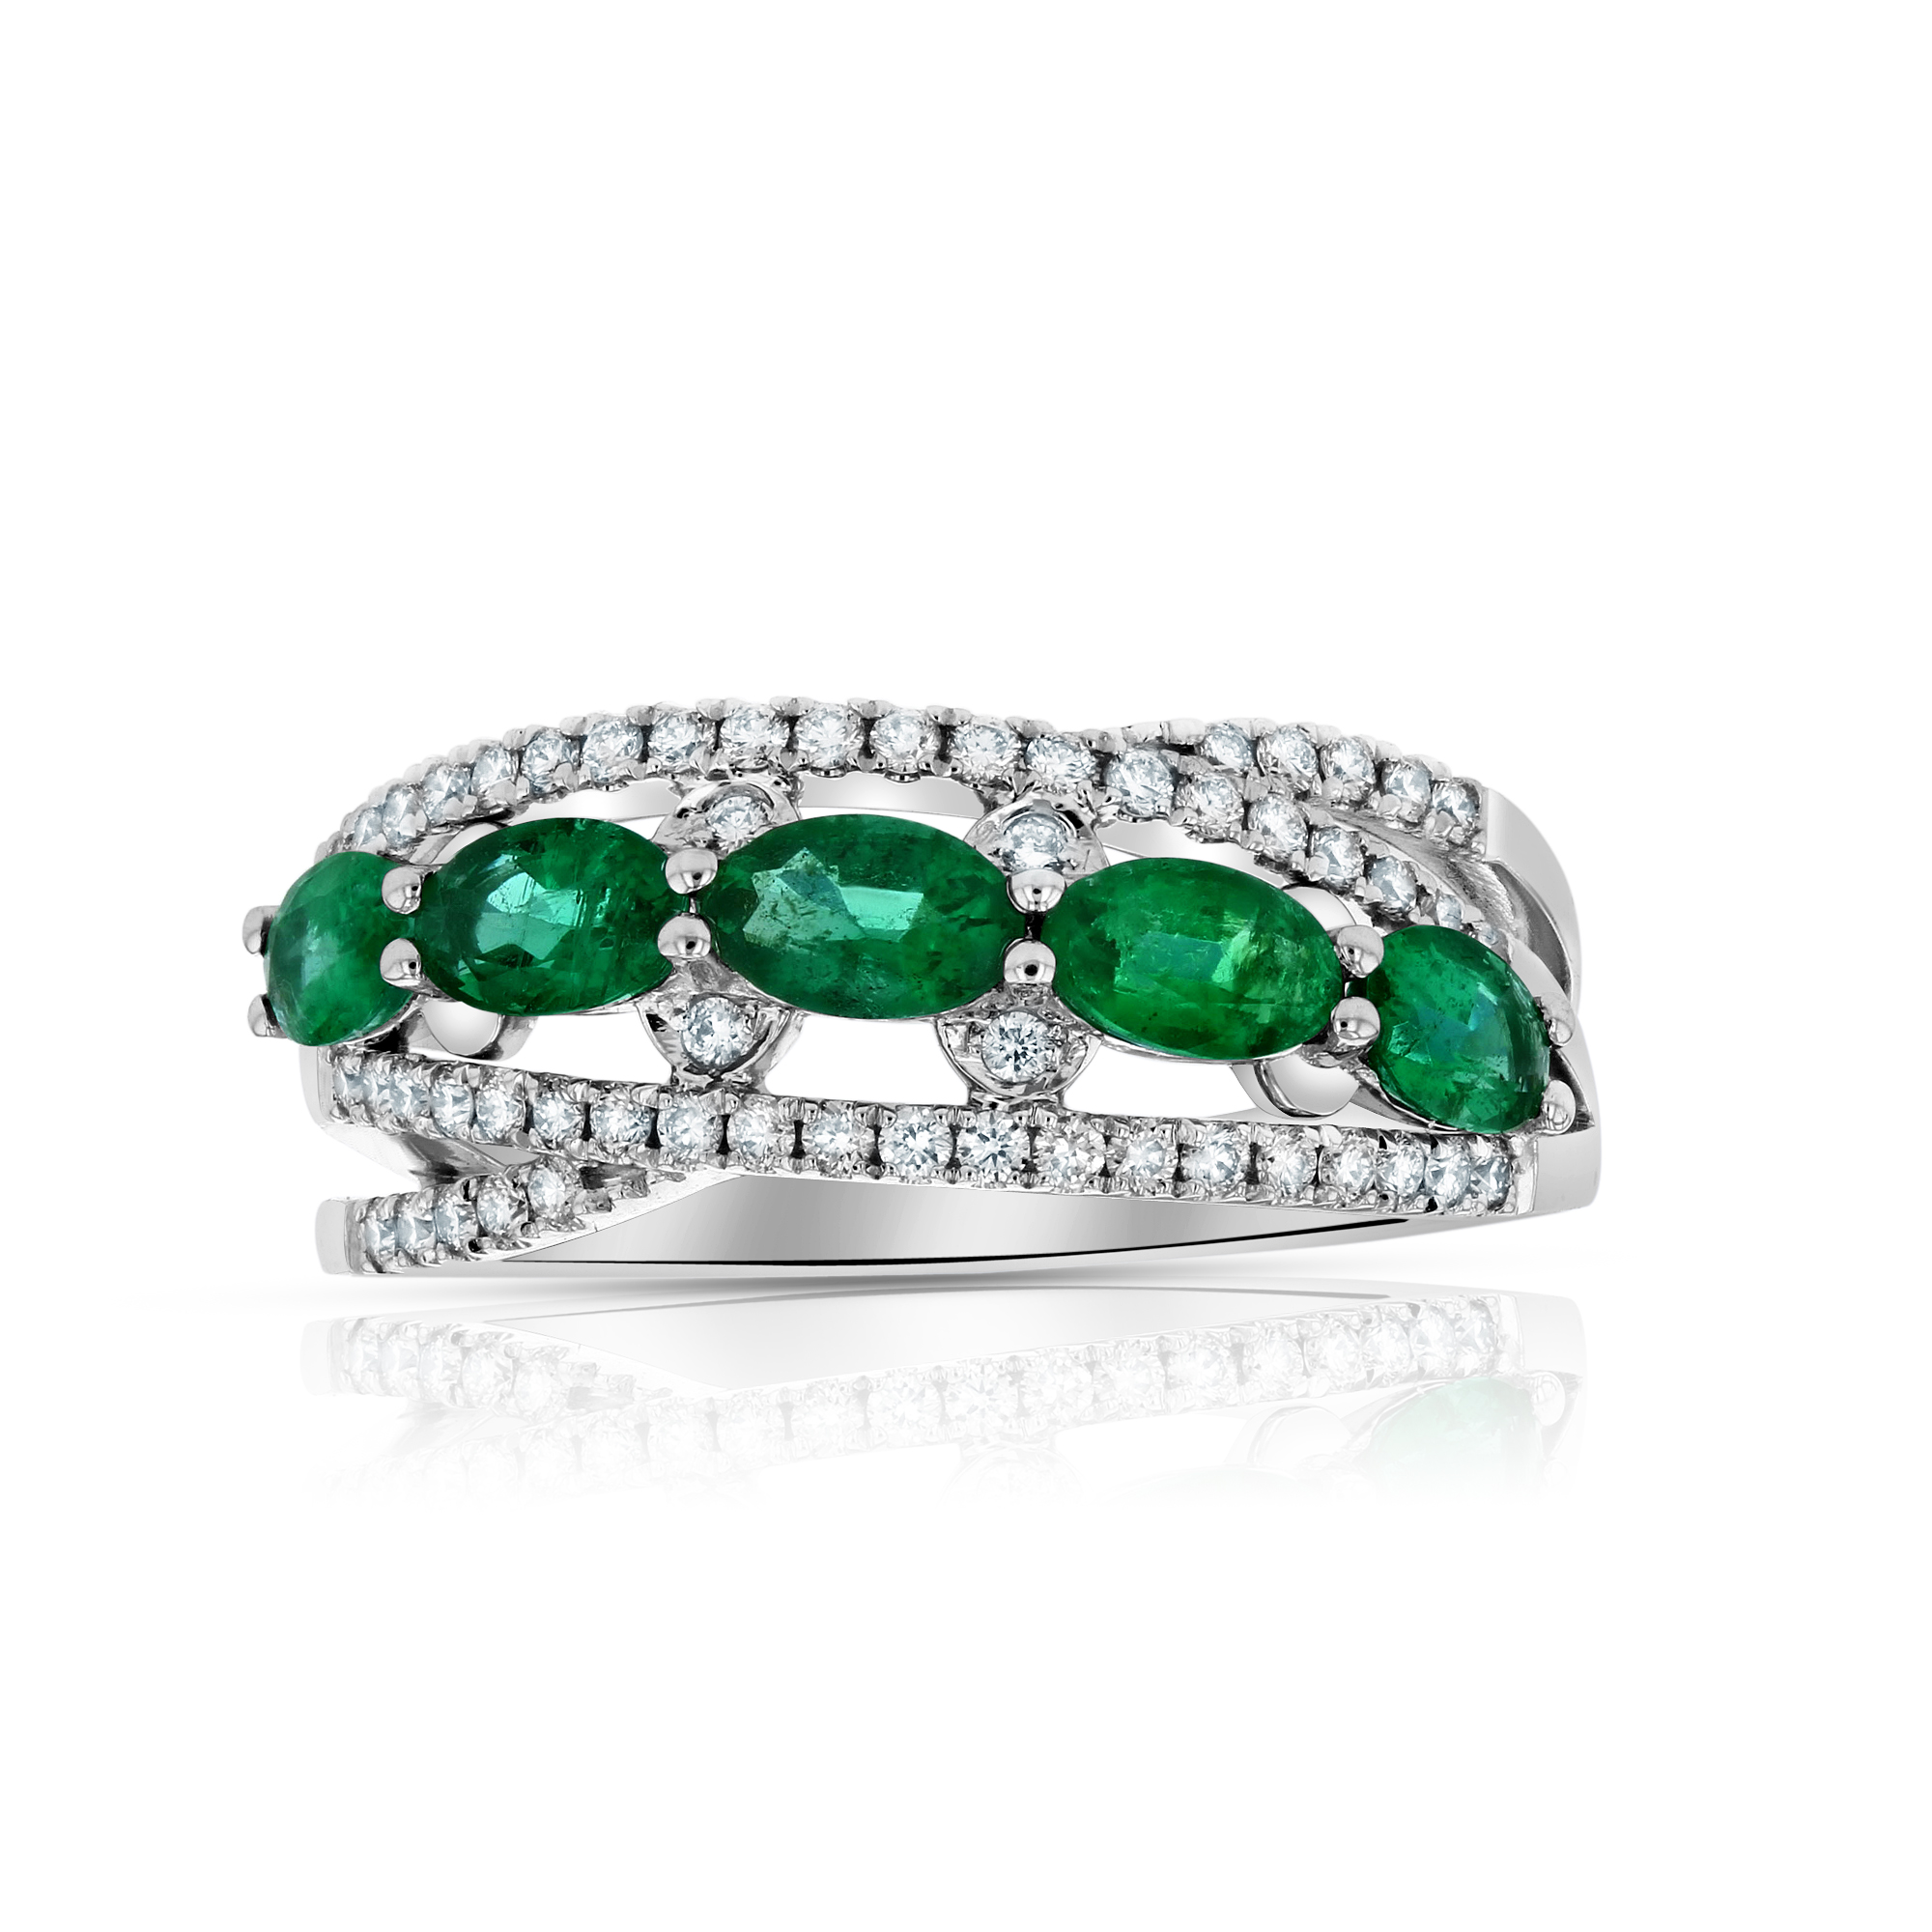 1.31ctw Diamond and Emerald Ring in 14k White Gold